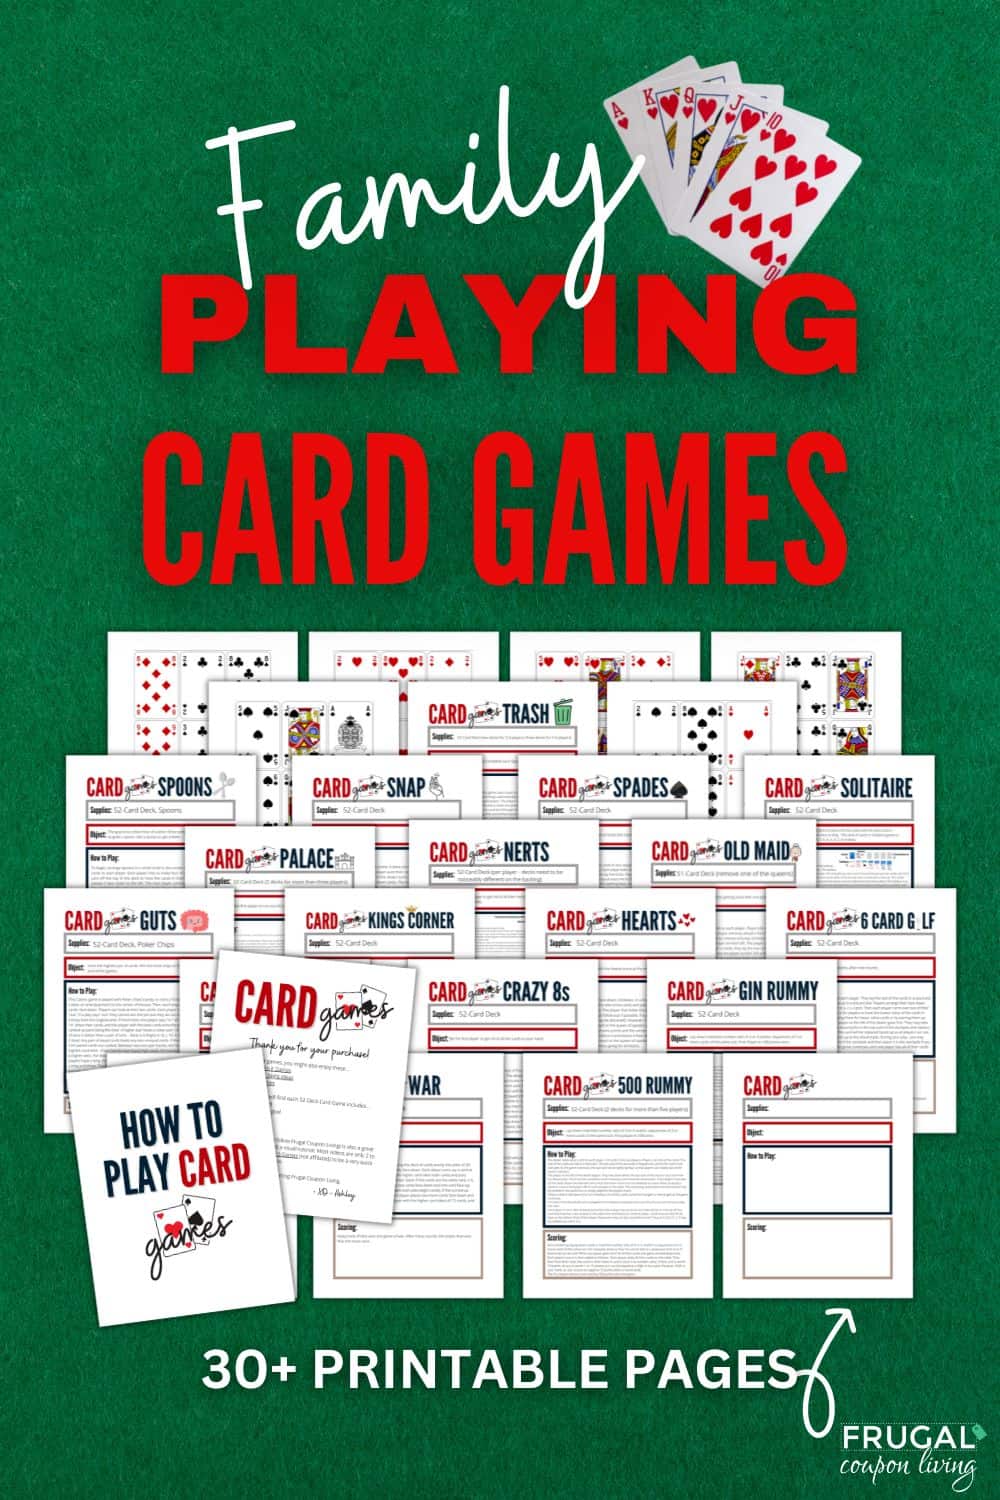 HOW TO PLAY ' Every player picks a card. The person who picks the highest  number deals. Action Cards count as zero for this part of the game. Once  the cards are